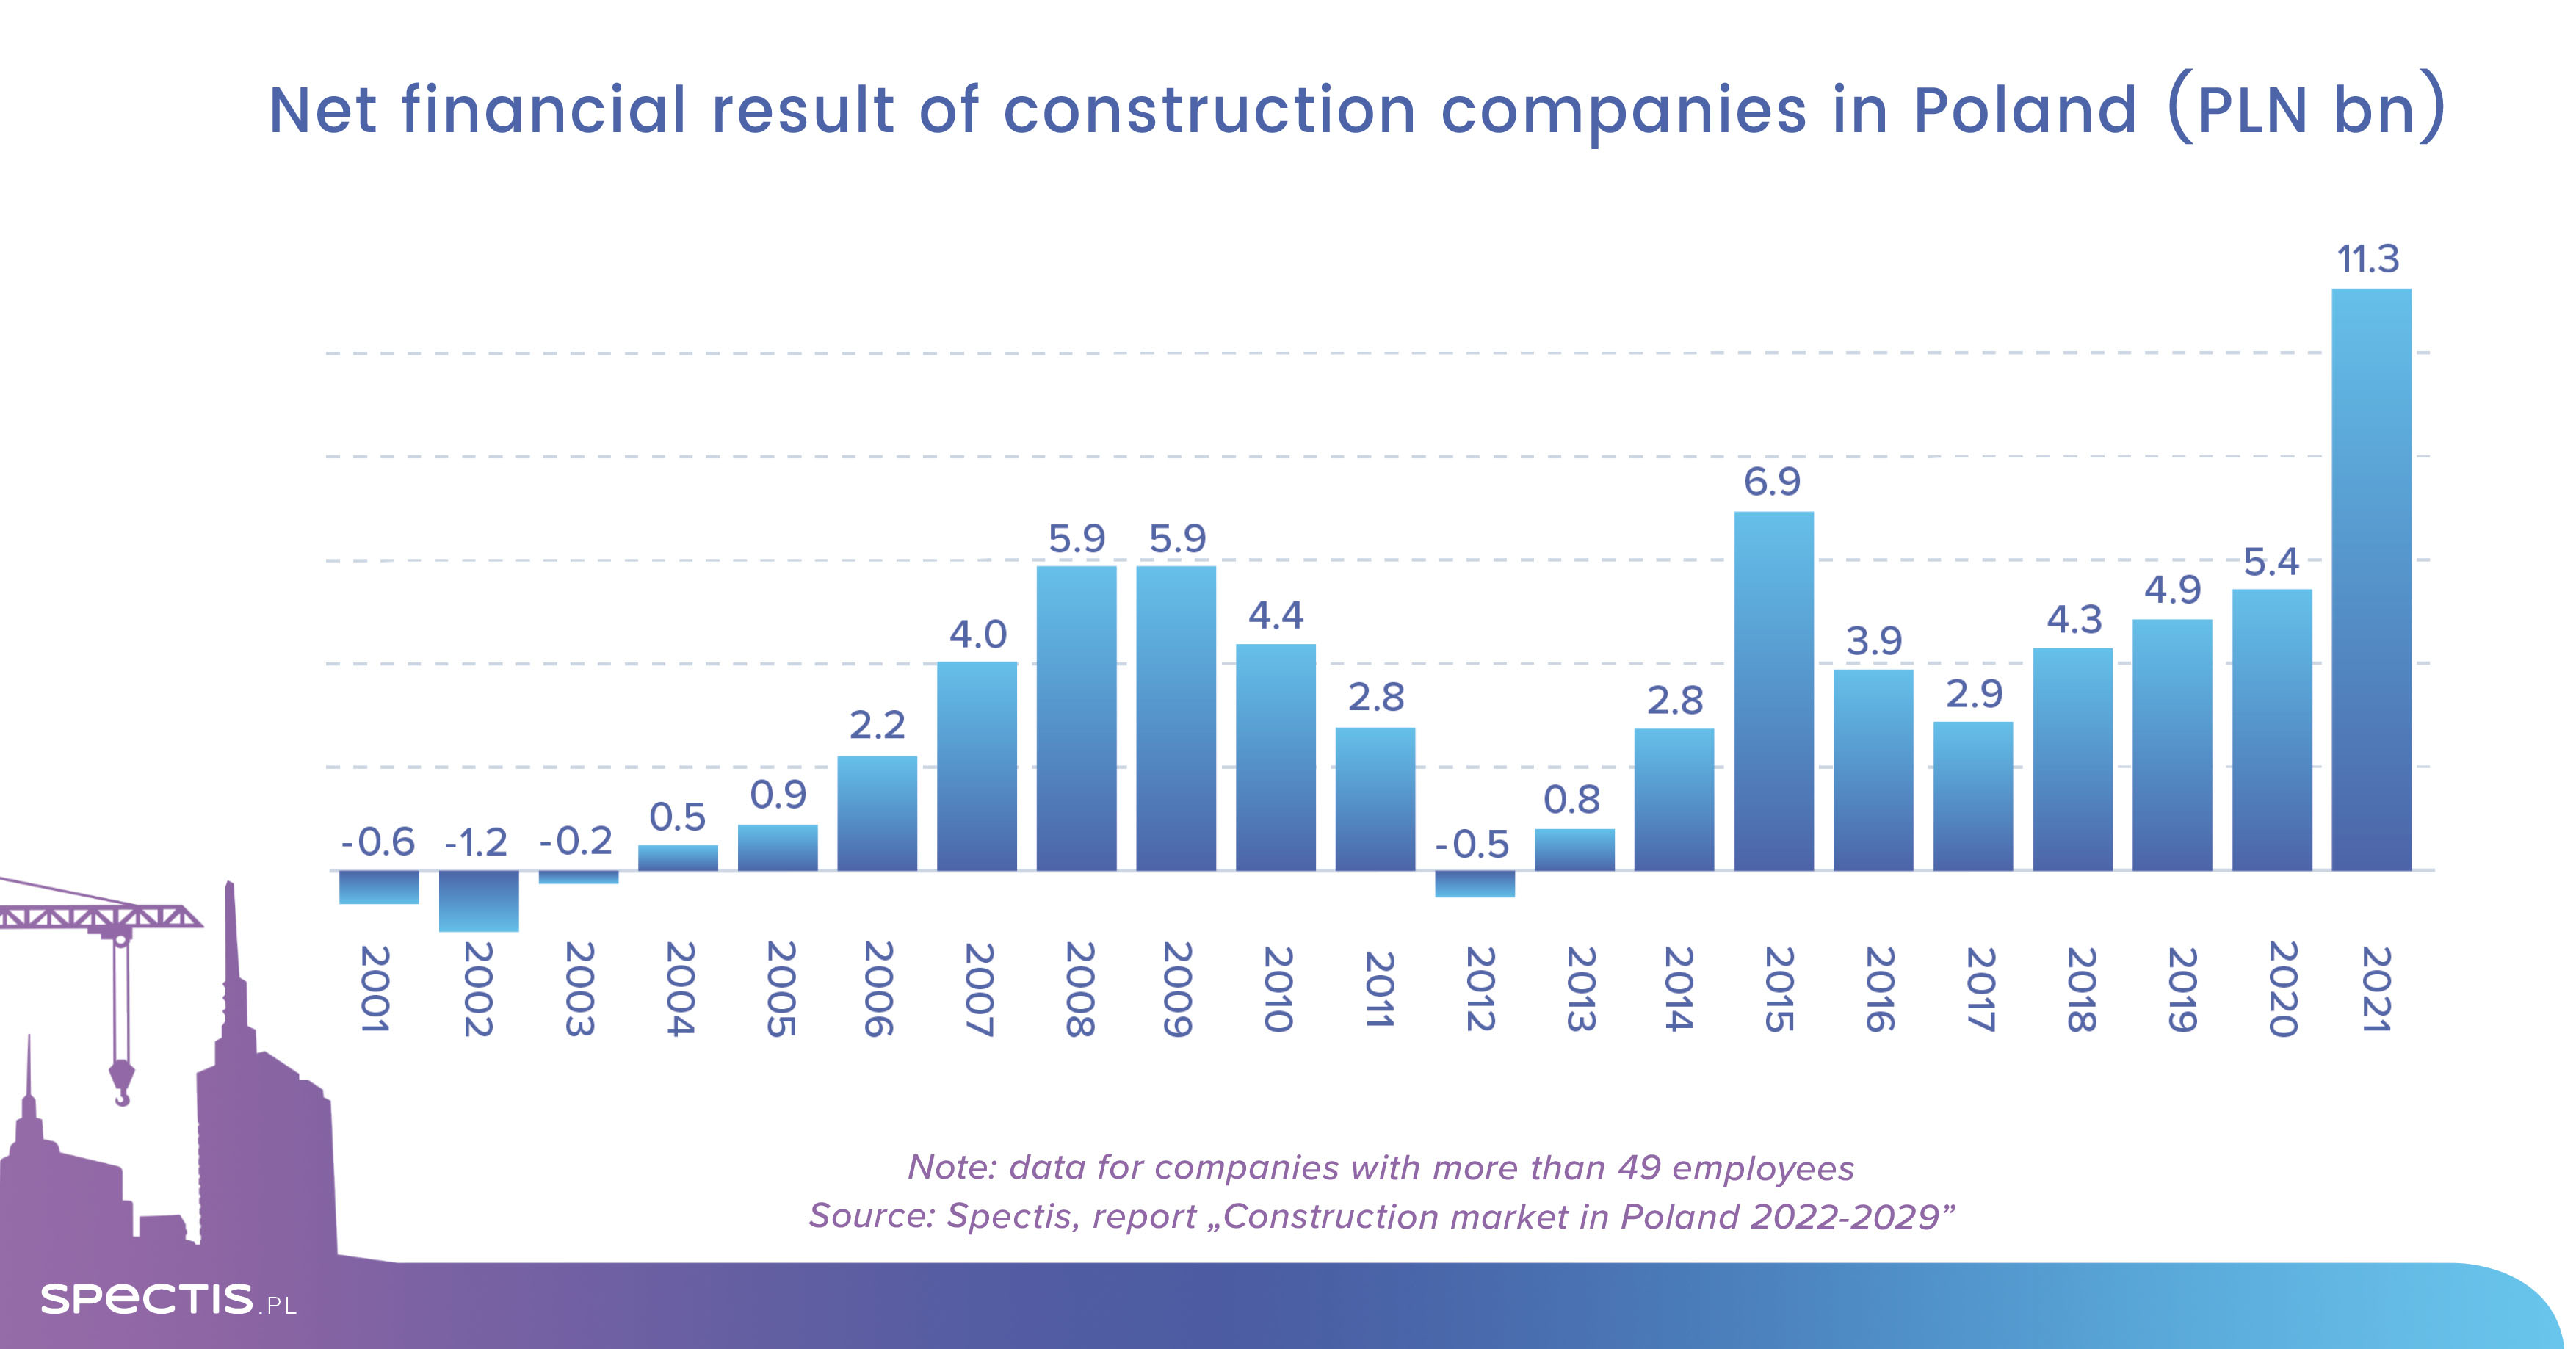 War in Ukraine poised to impact profit margins in the Polish construction sector